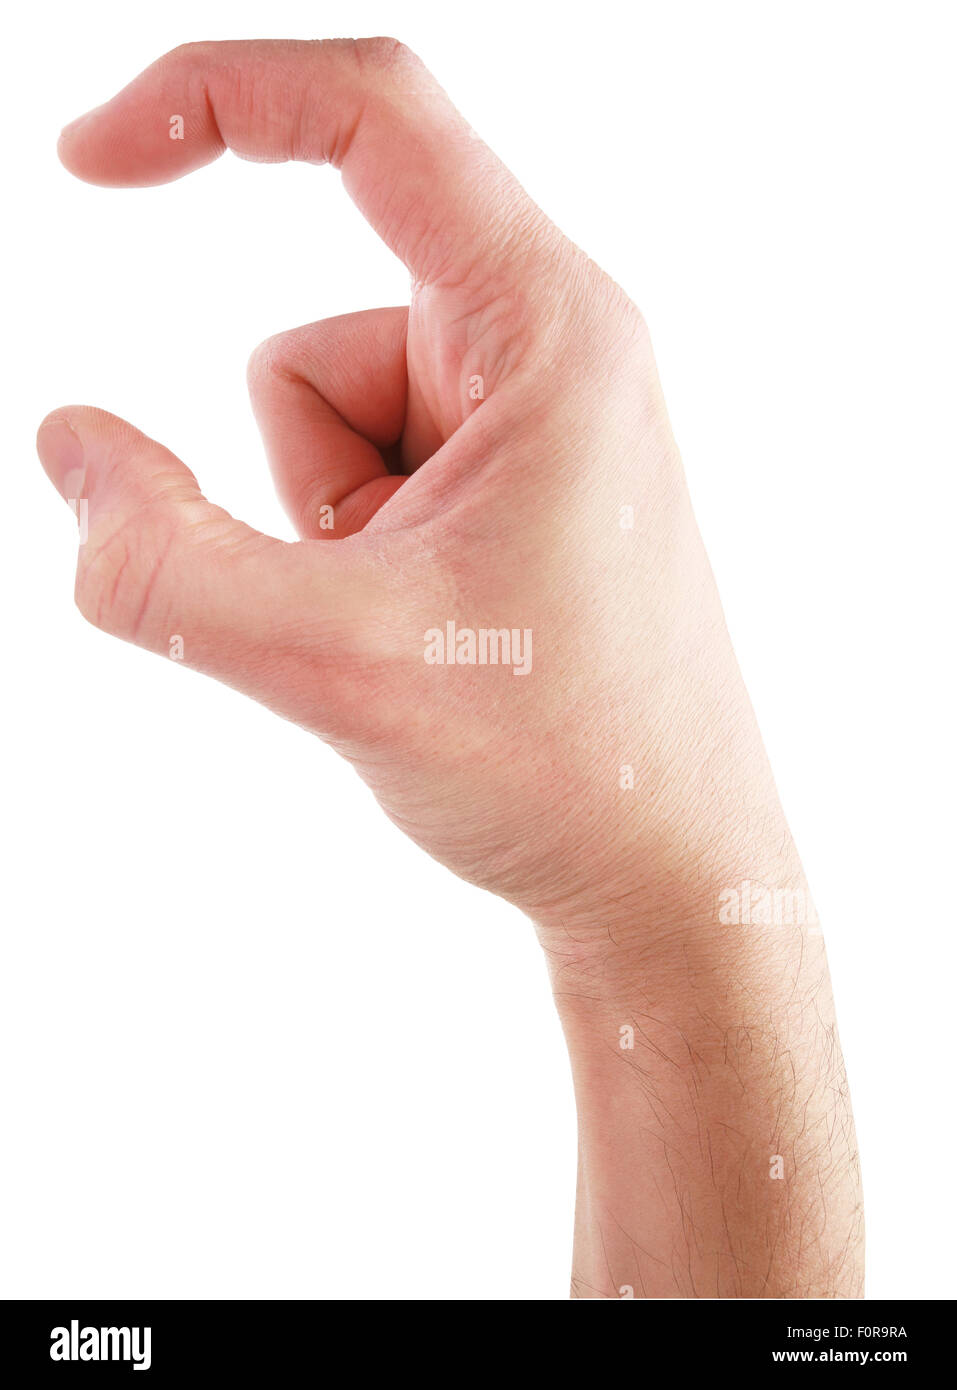 Hand picking up or pinching something isoled on white with clipping path Stock Photo